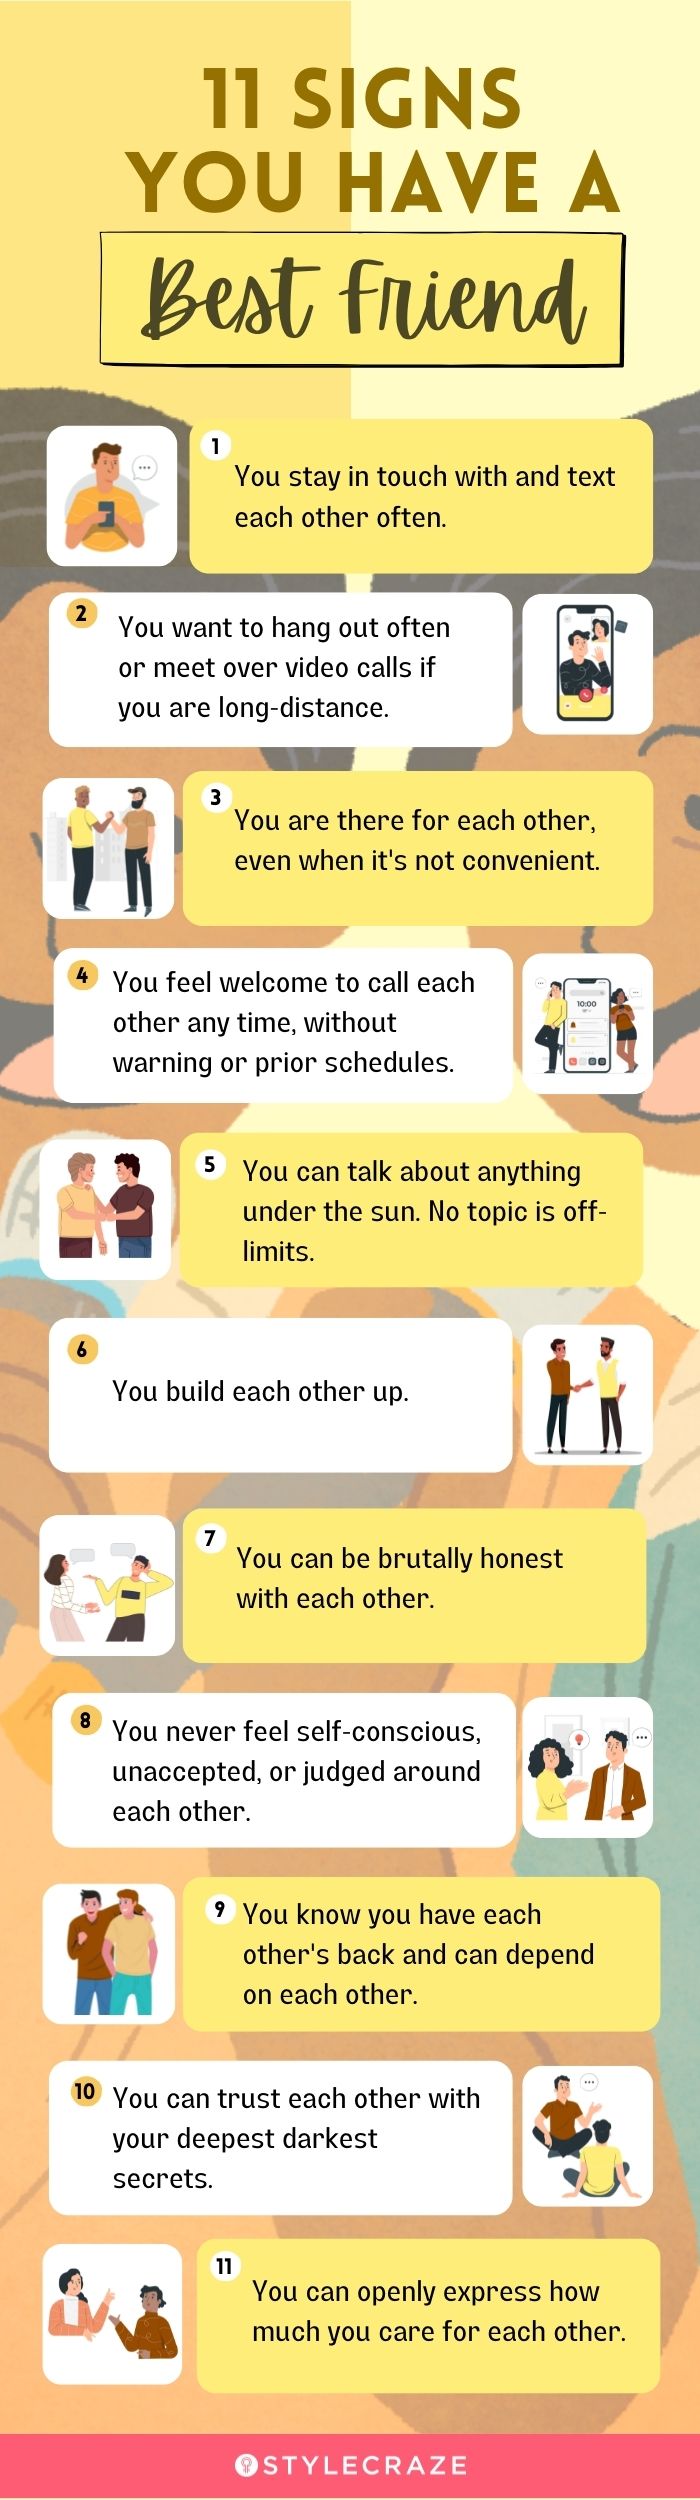 11 signs you have a best friend [infographic]